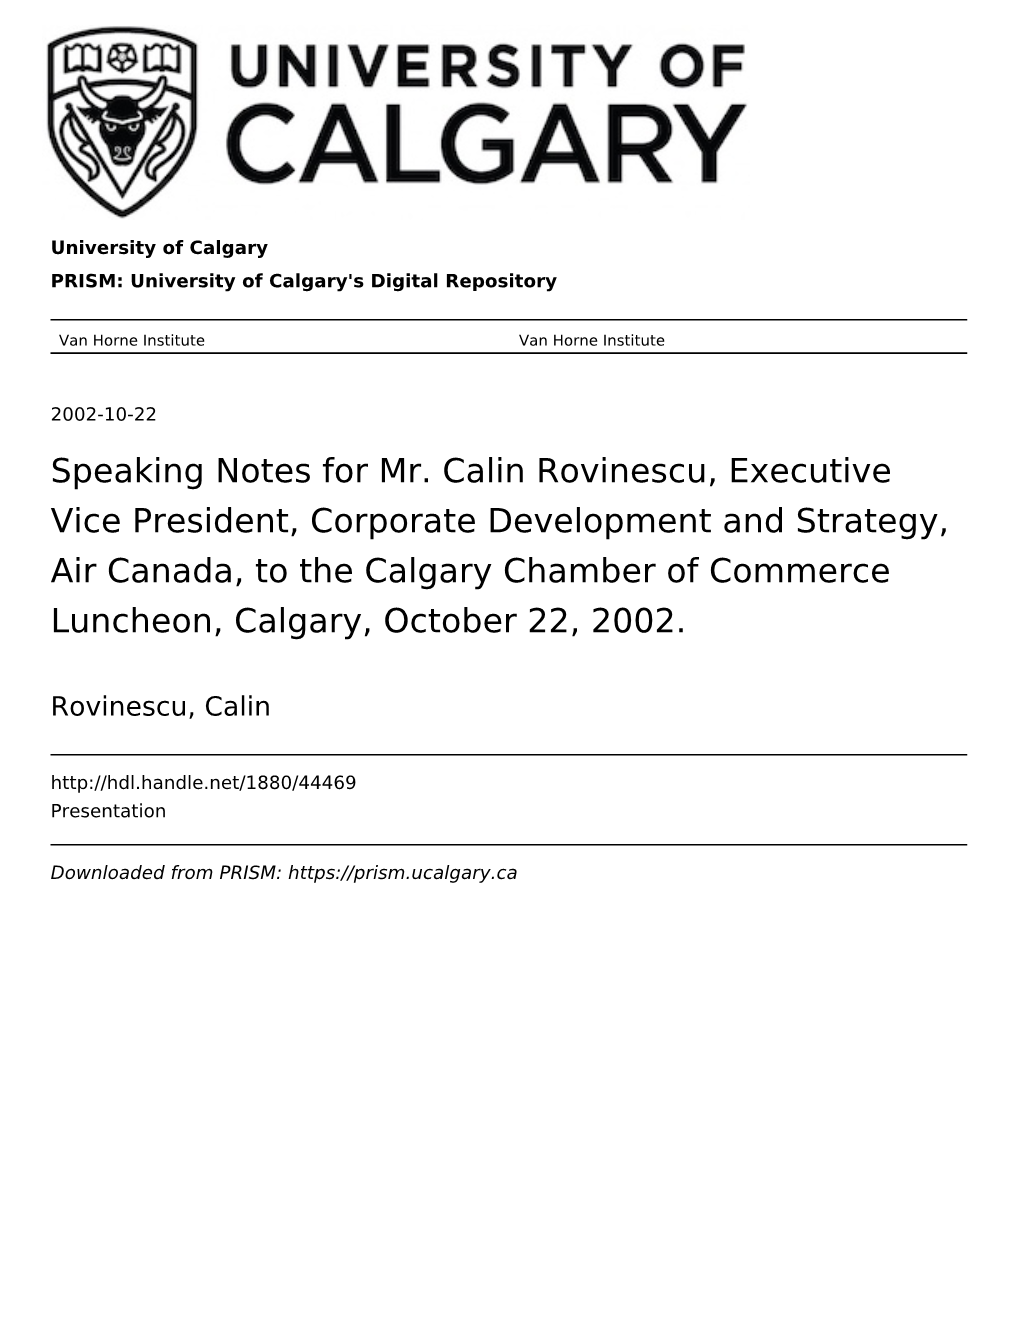 Speaking Notes for Mr. Calin Rovinescu, Executive Vice